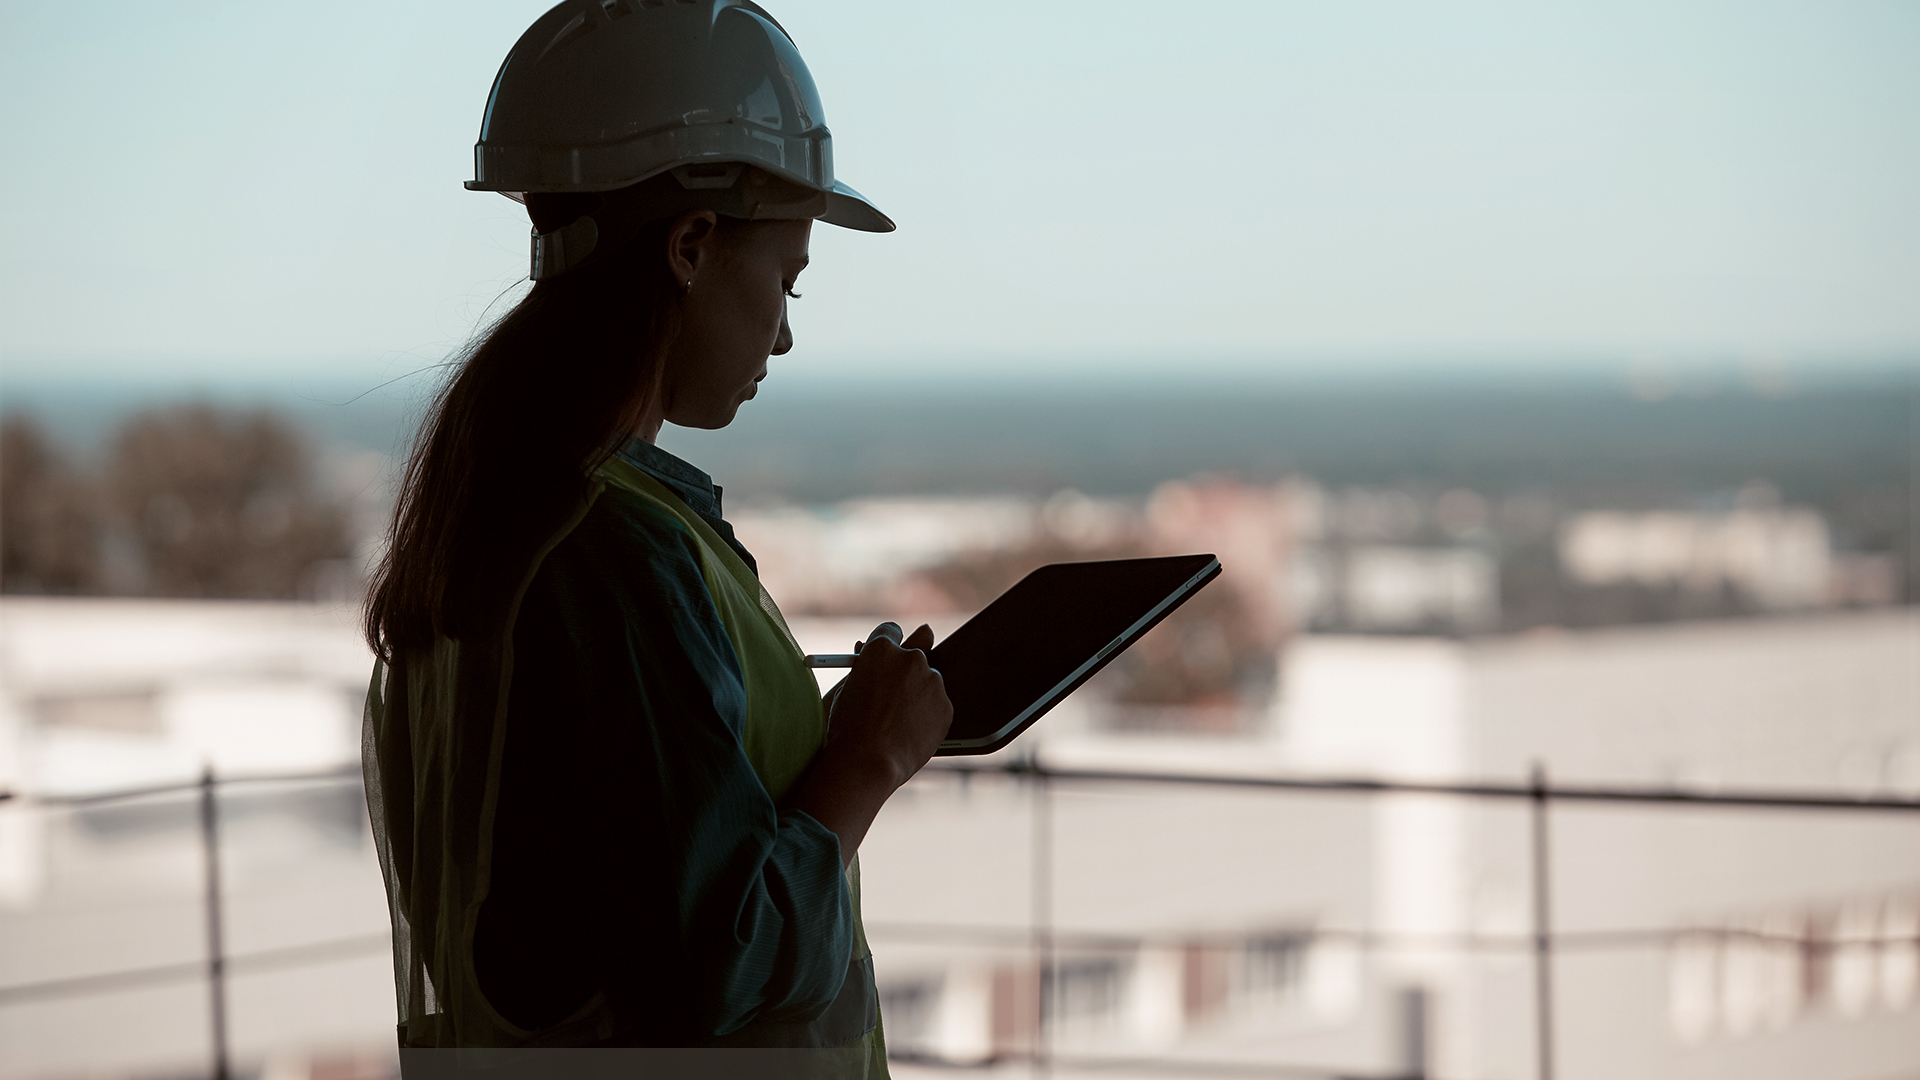 Construction professional in hard hat holding handheld device